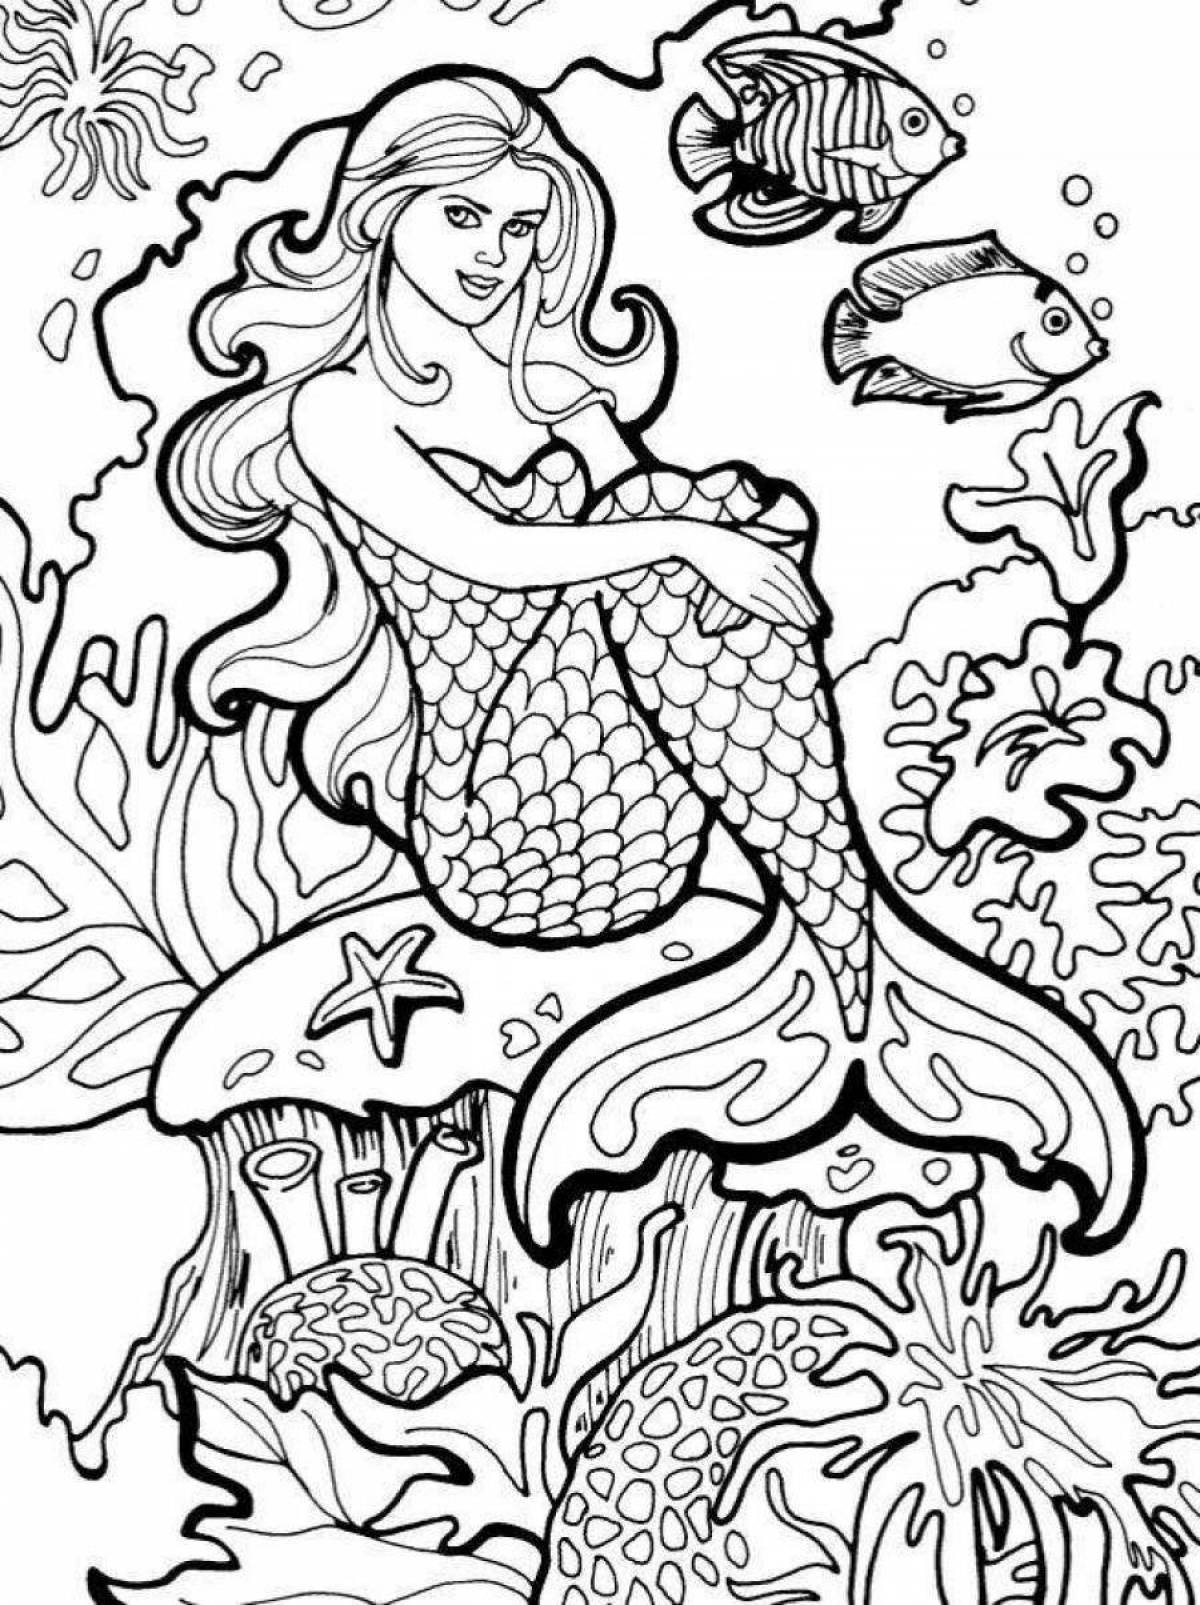 Great anti-stress coloring book for women